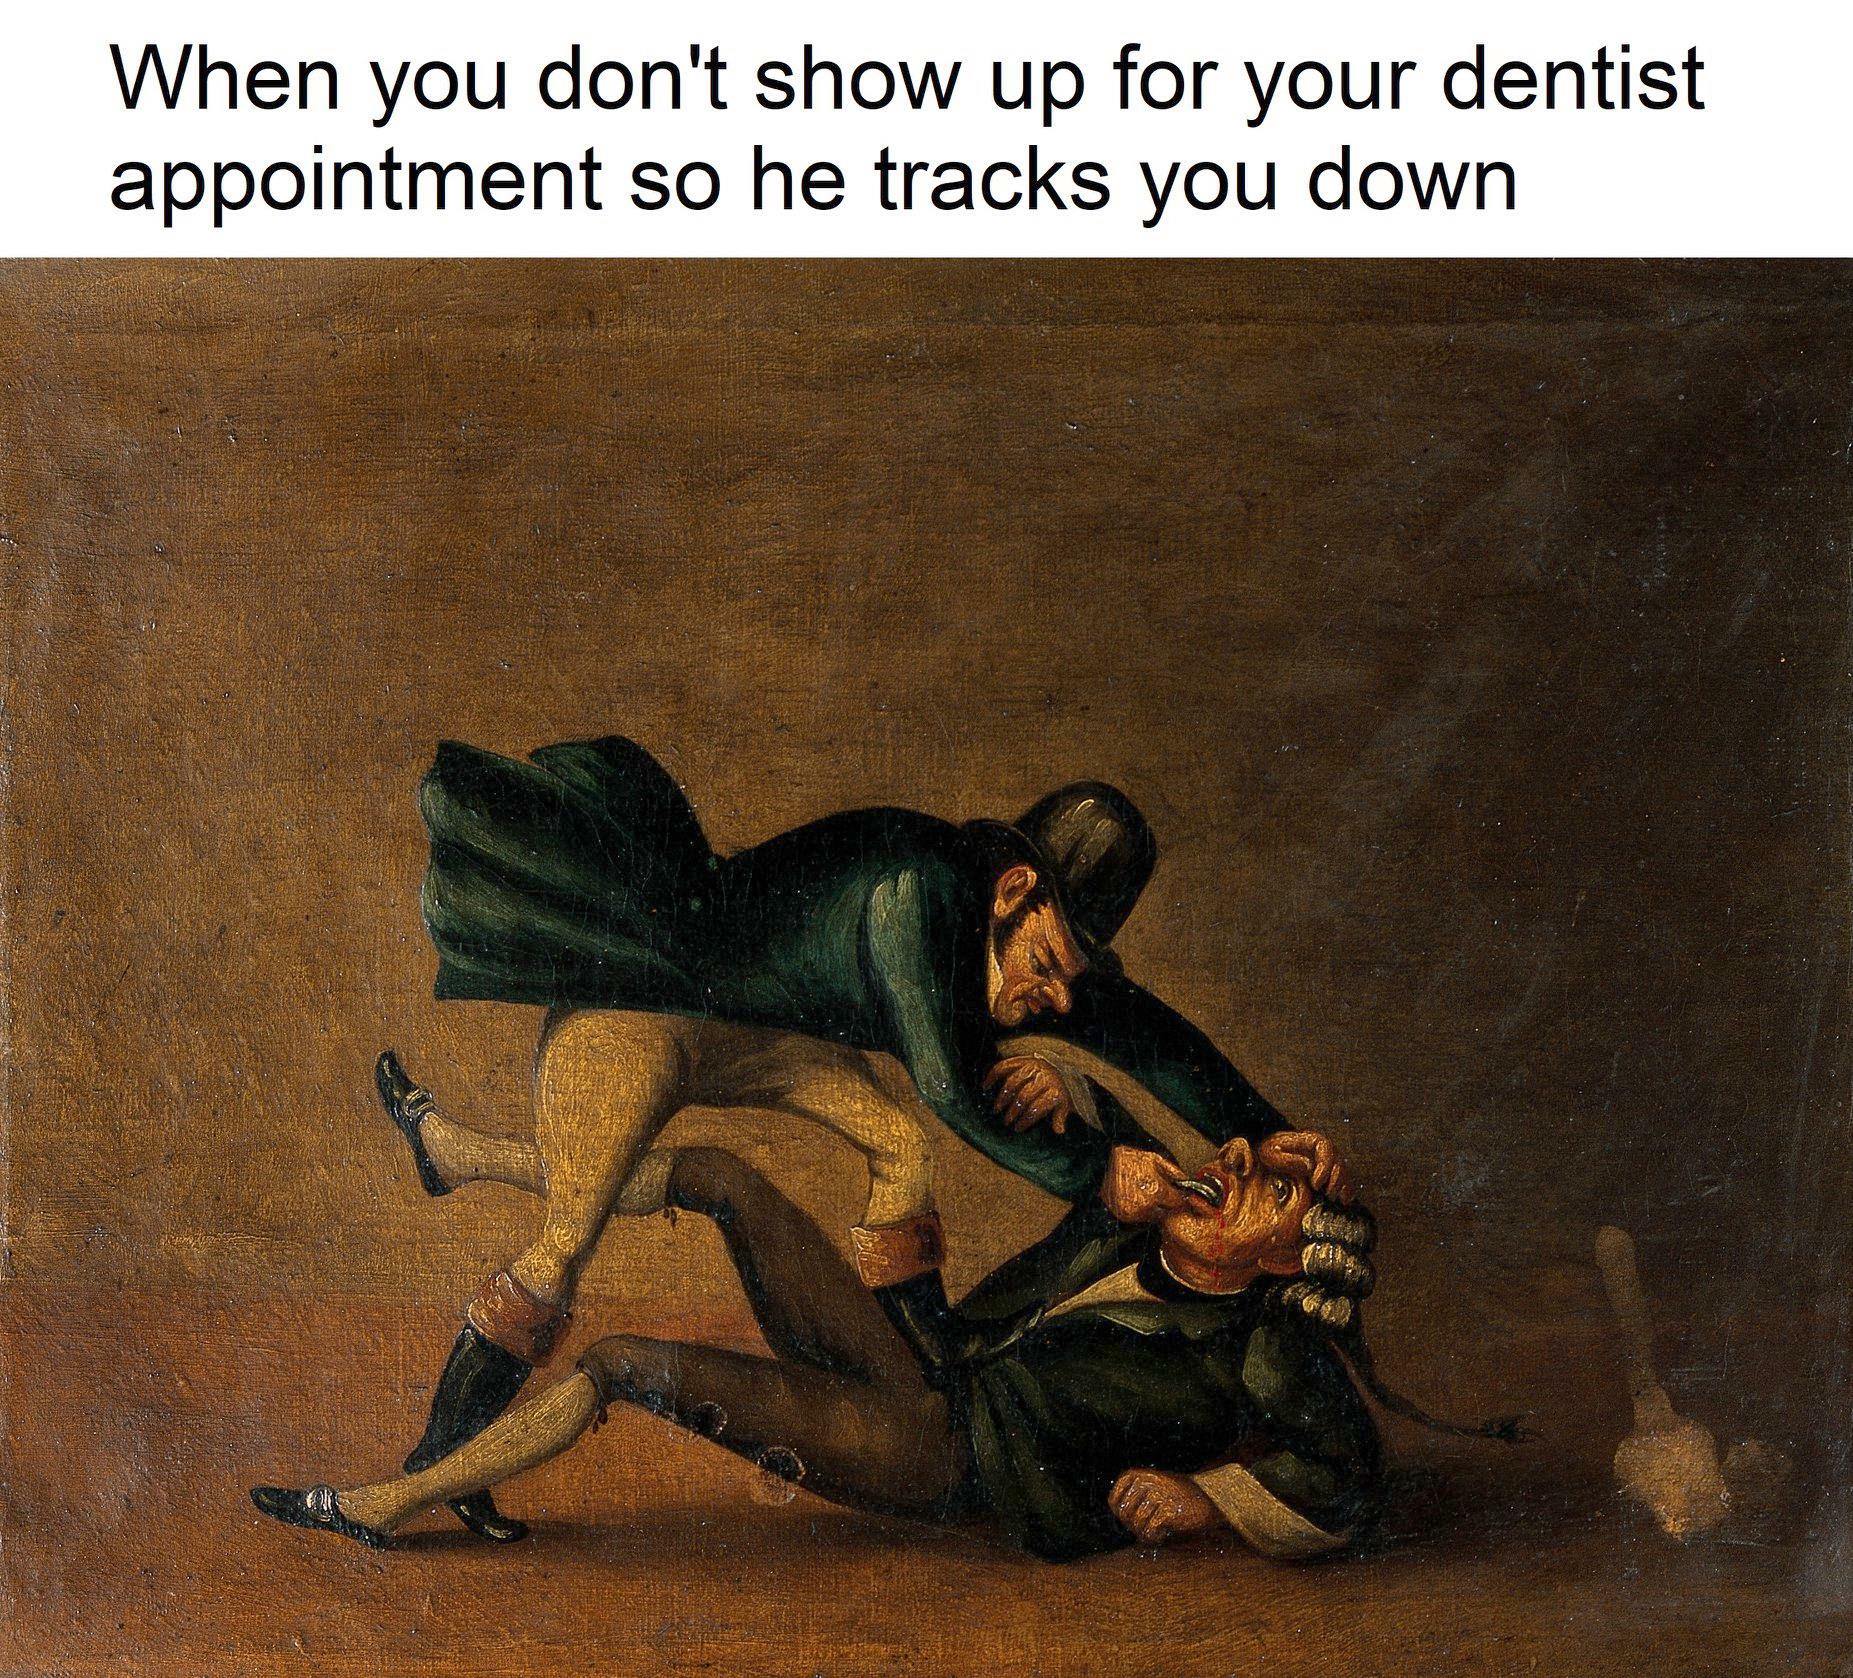 classical art meme dentist - When you don't show up for your dentist appointment so he tracks you down